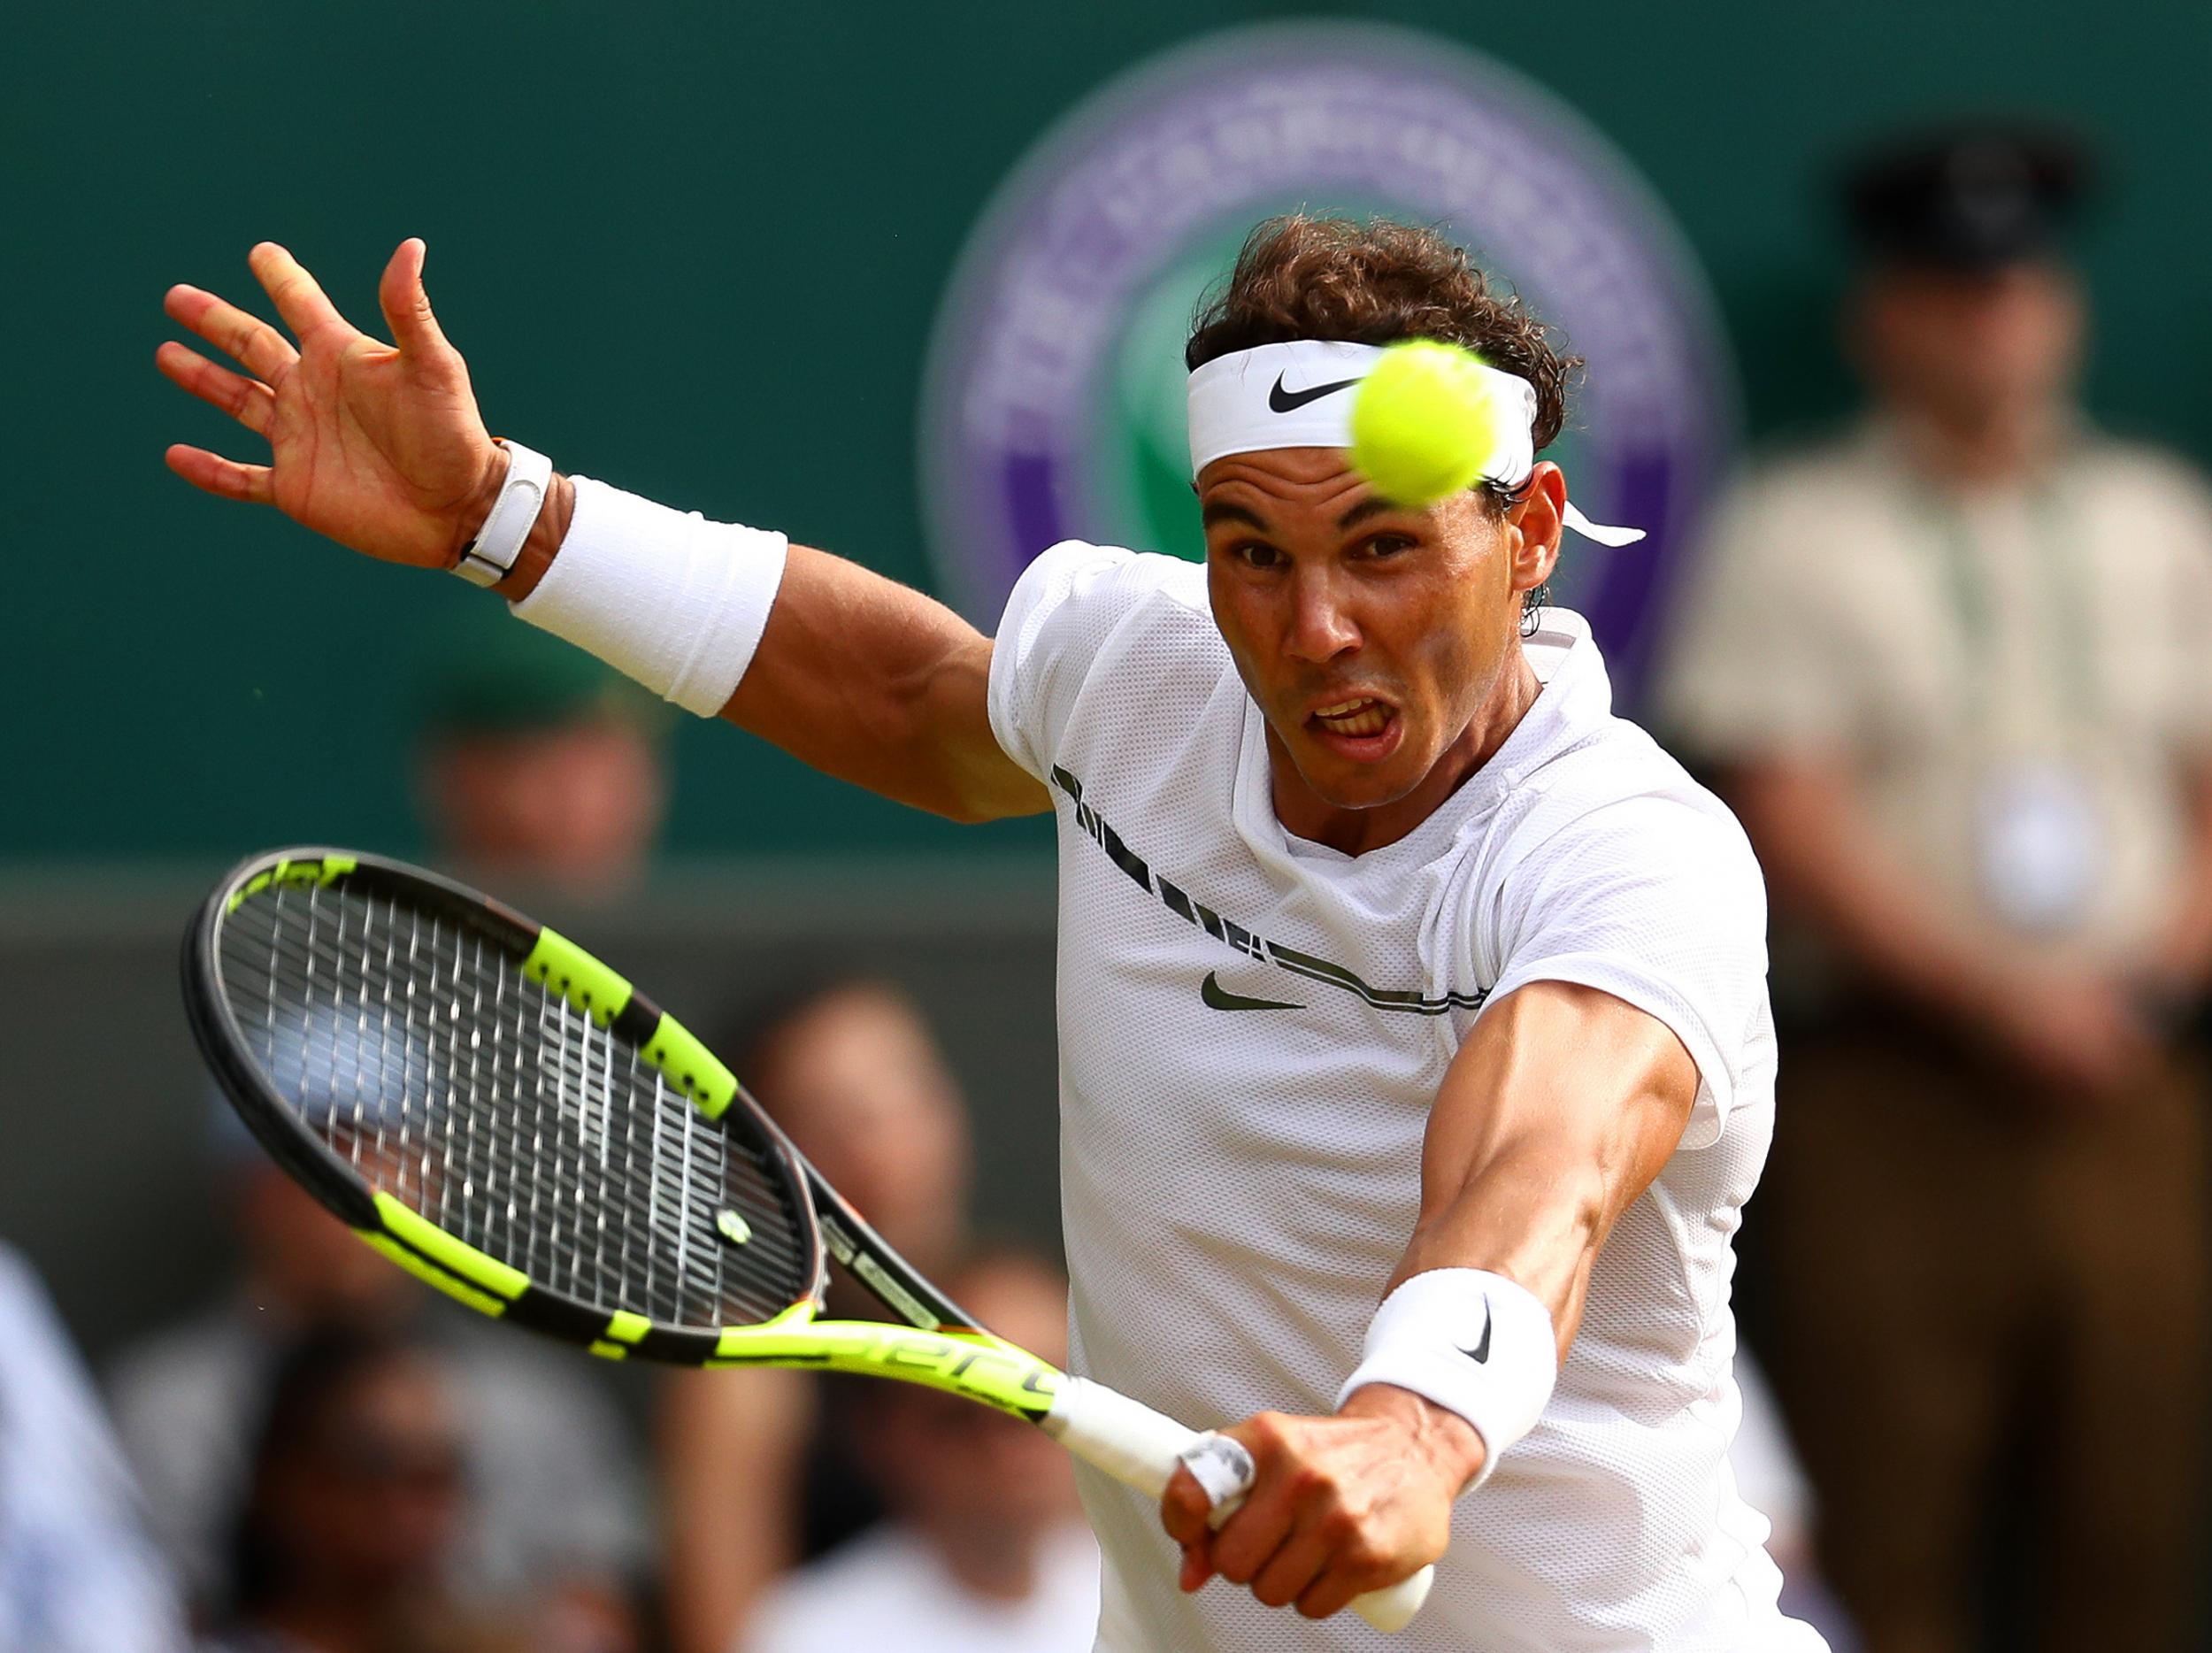 Nadal is hoping to win a third Wimbledon title